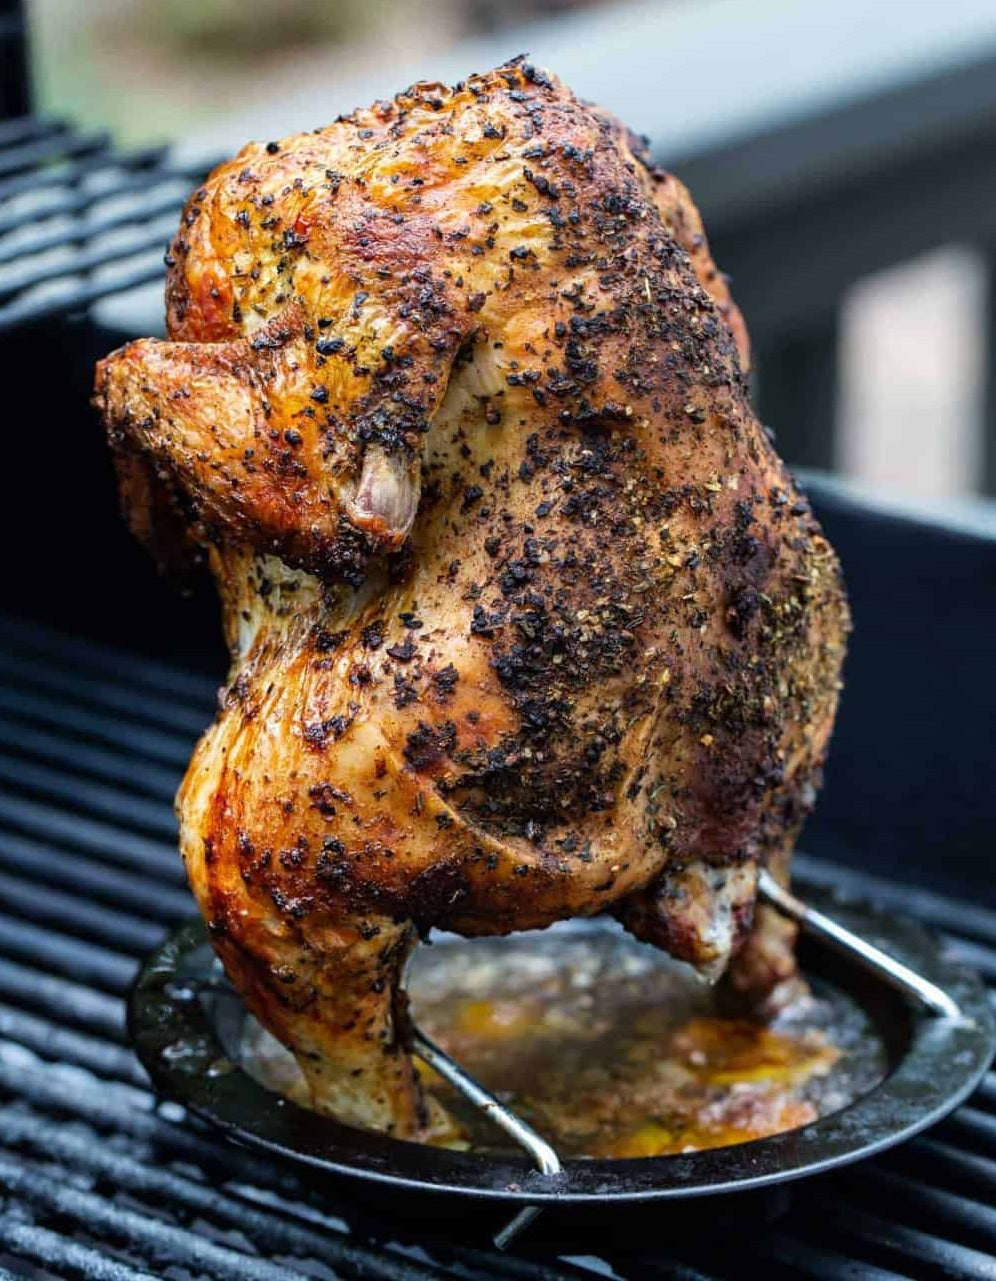 Roasted/Grilled Whole Chicken